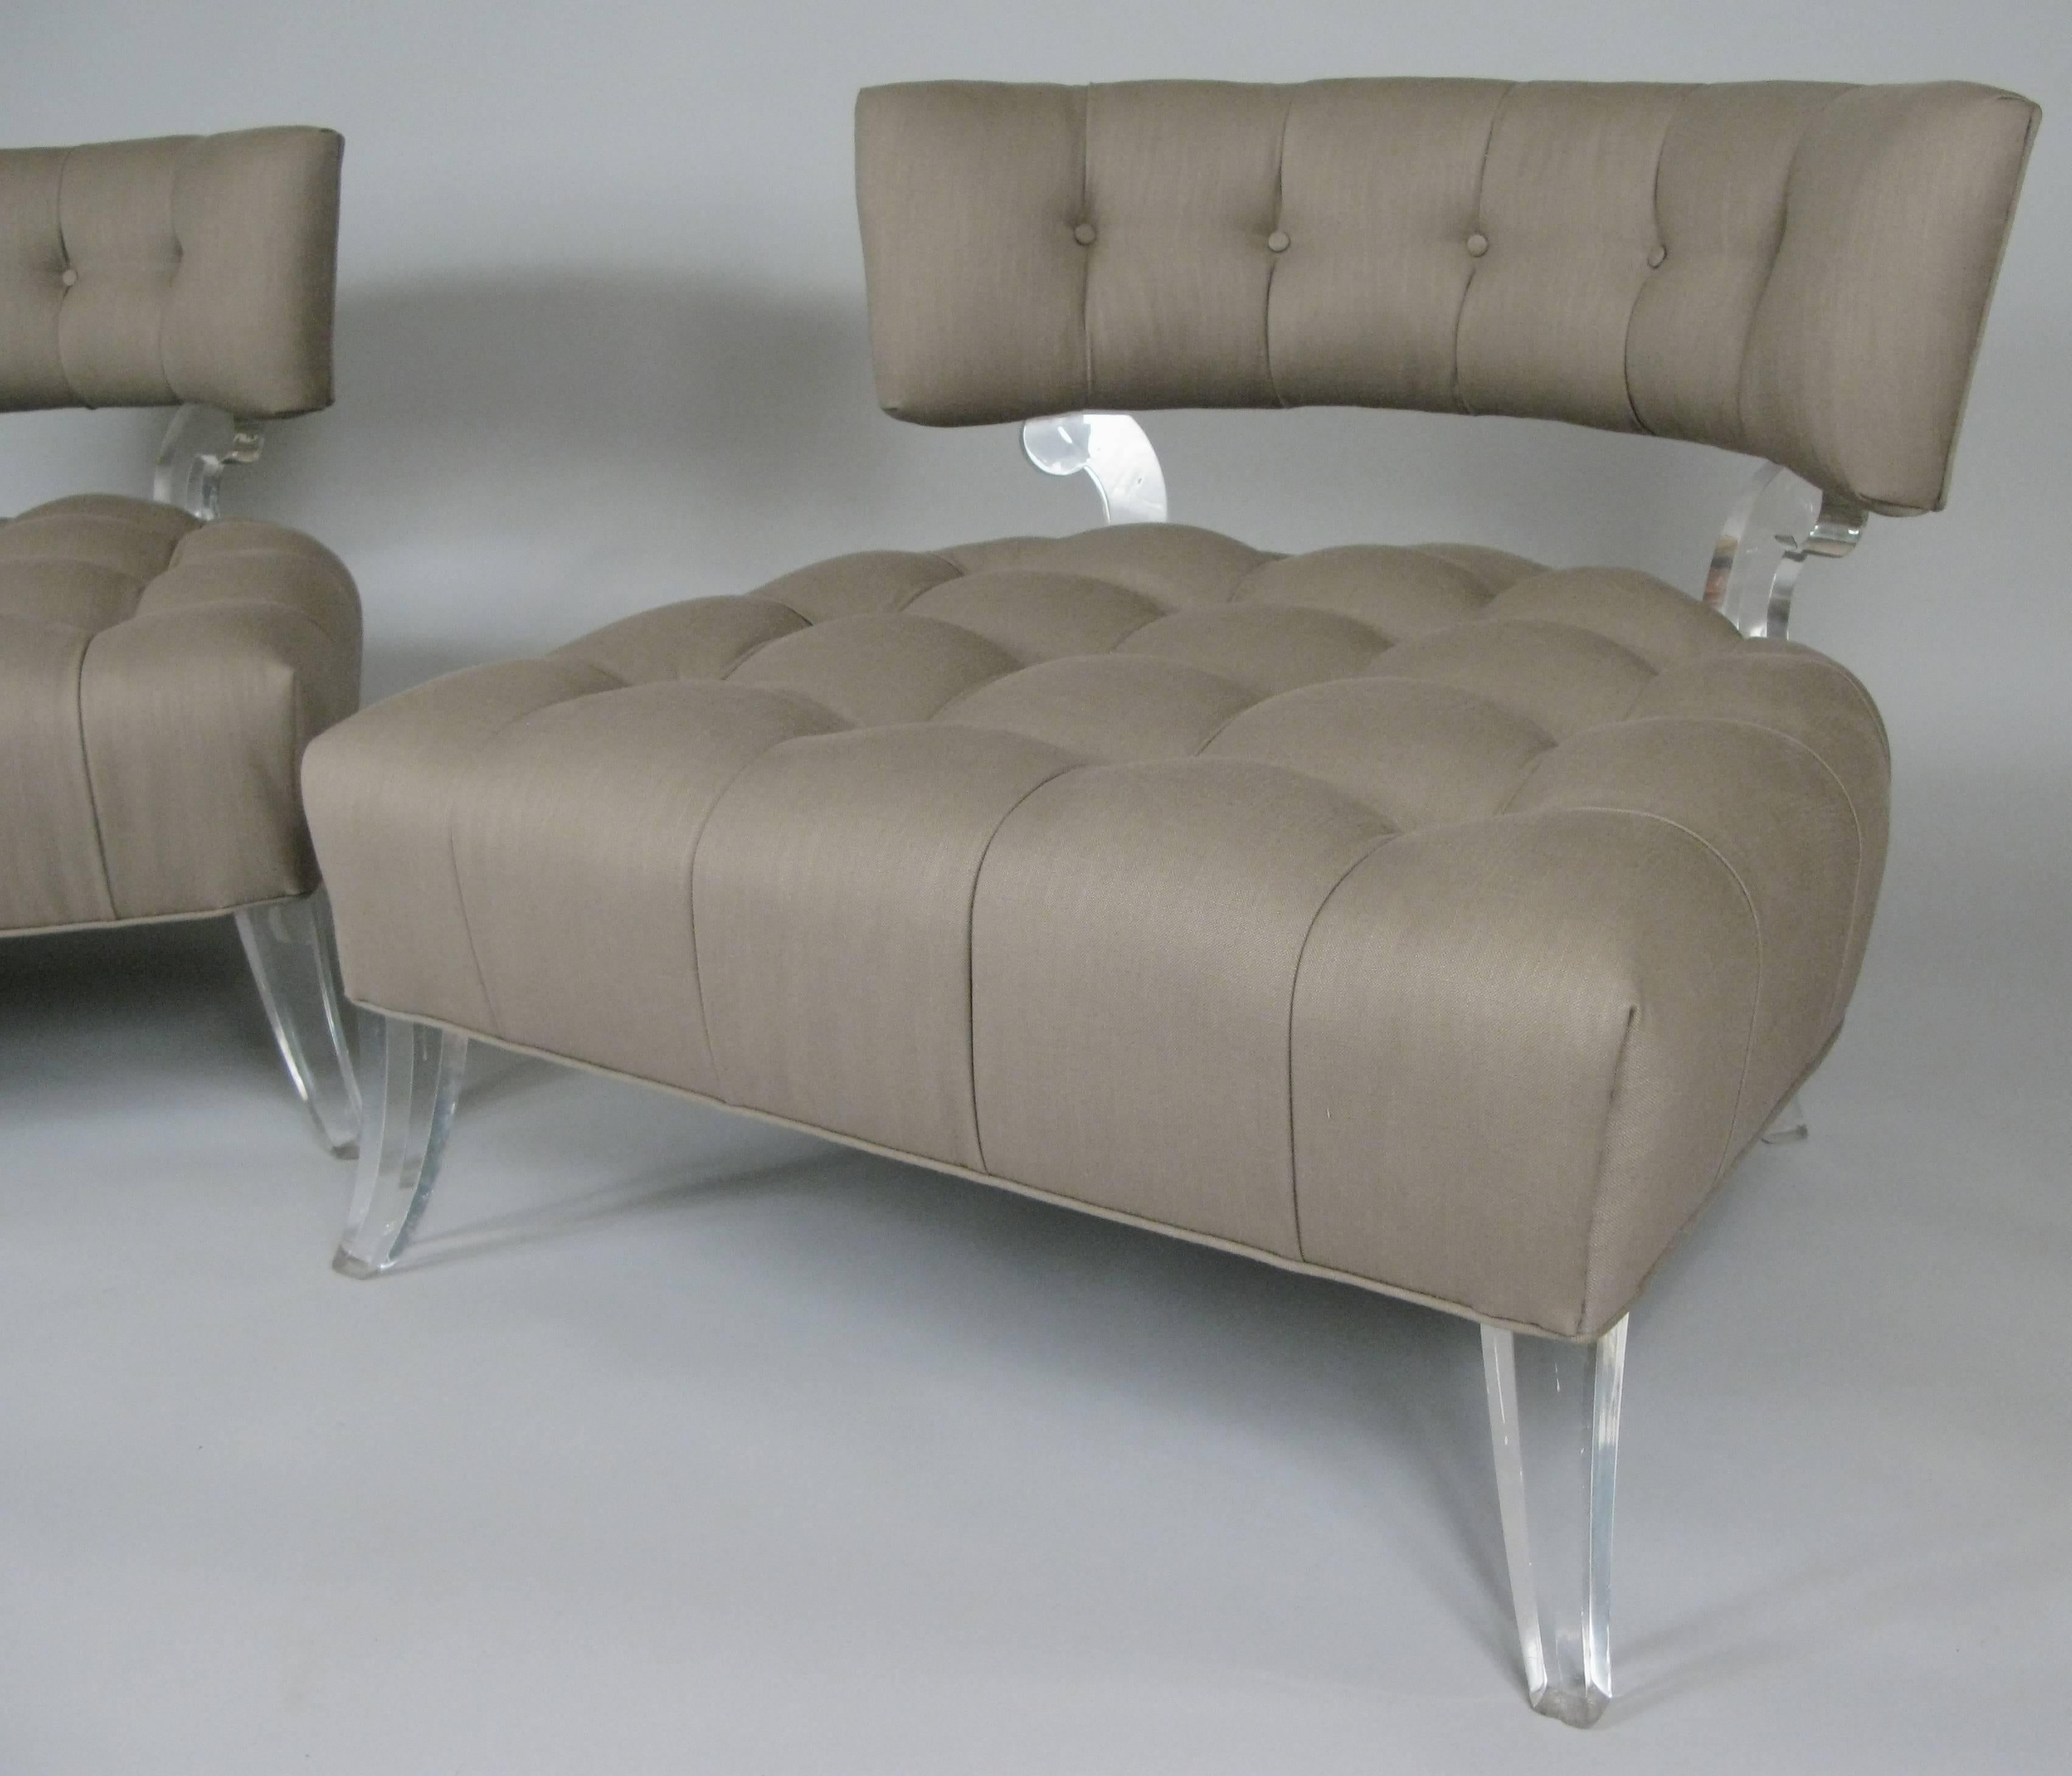 Pair of Rare 1940s Lucite Tufted Slipper Chairs by Grosfeld House 4